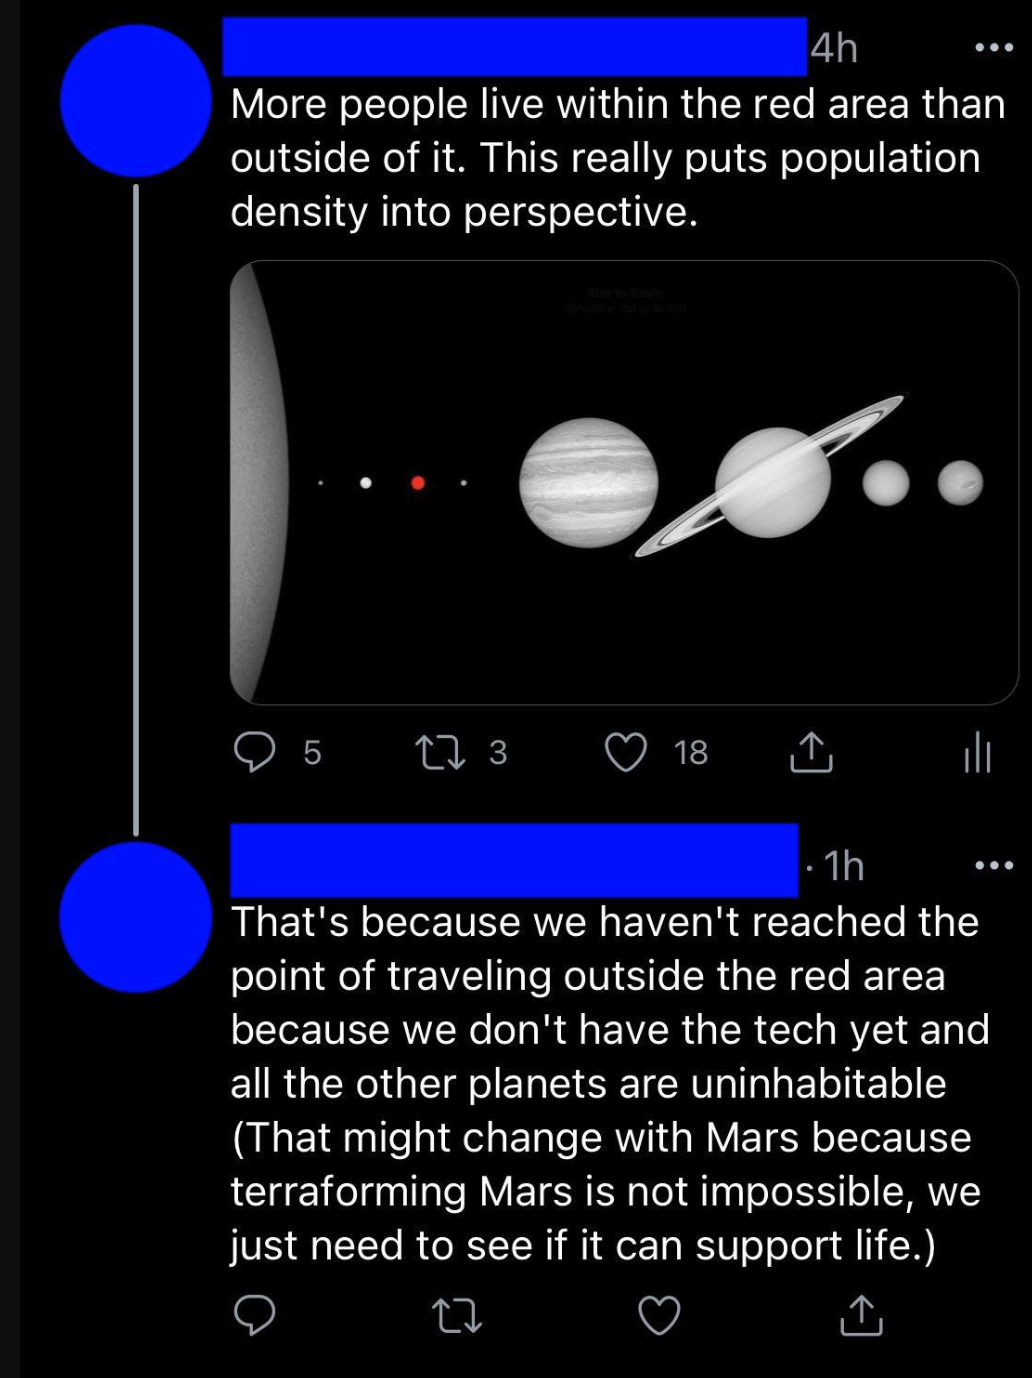 People Who Don't Get the Joke - More people live within the red area than outside of it.